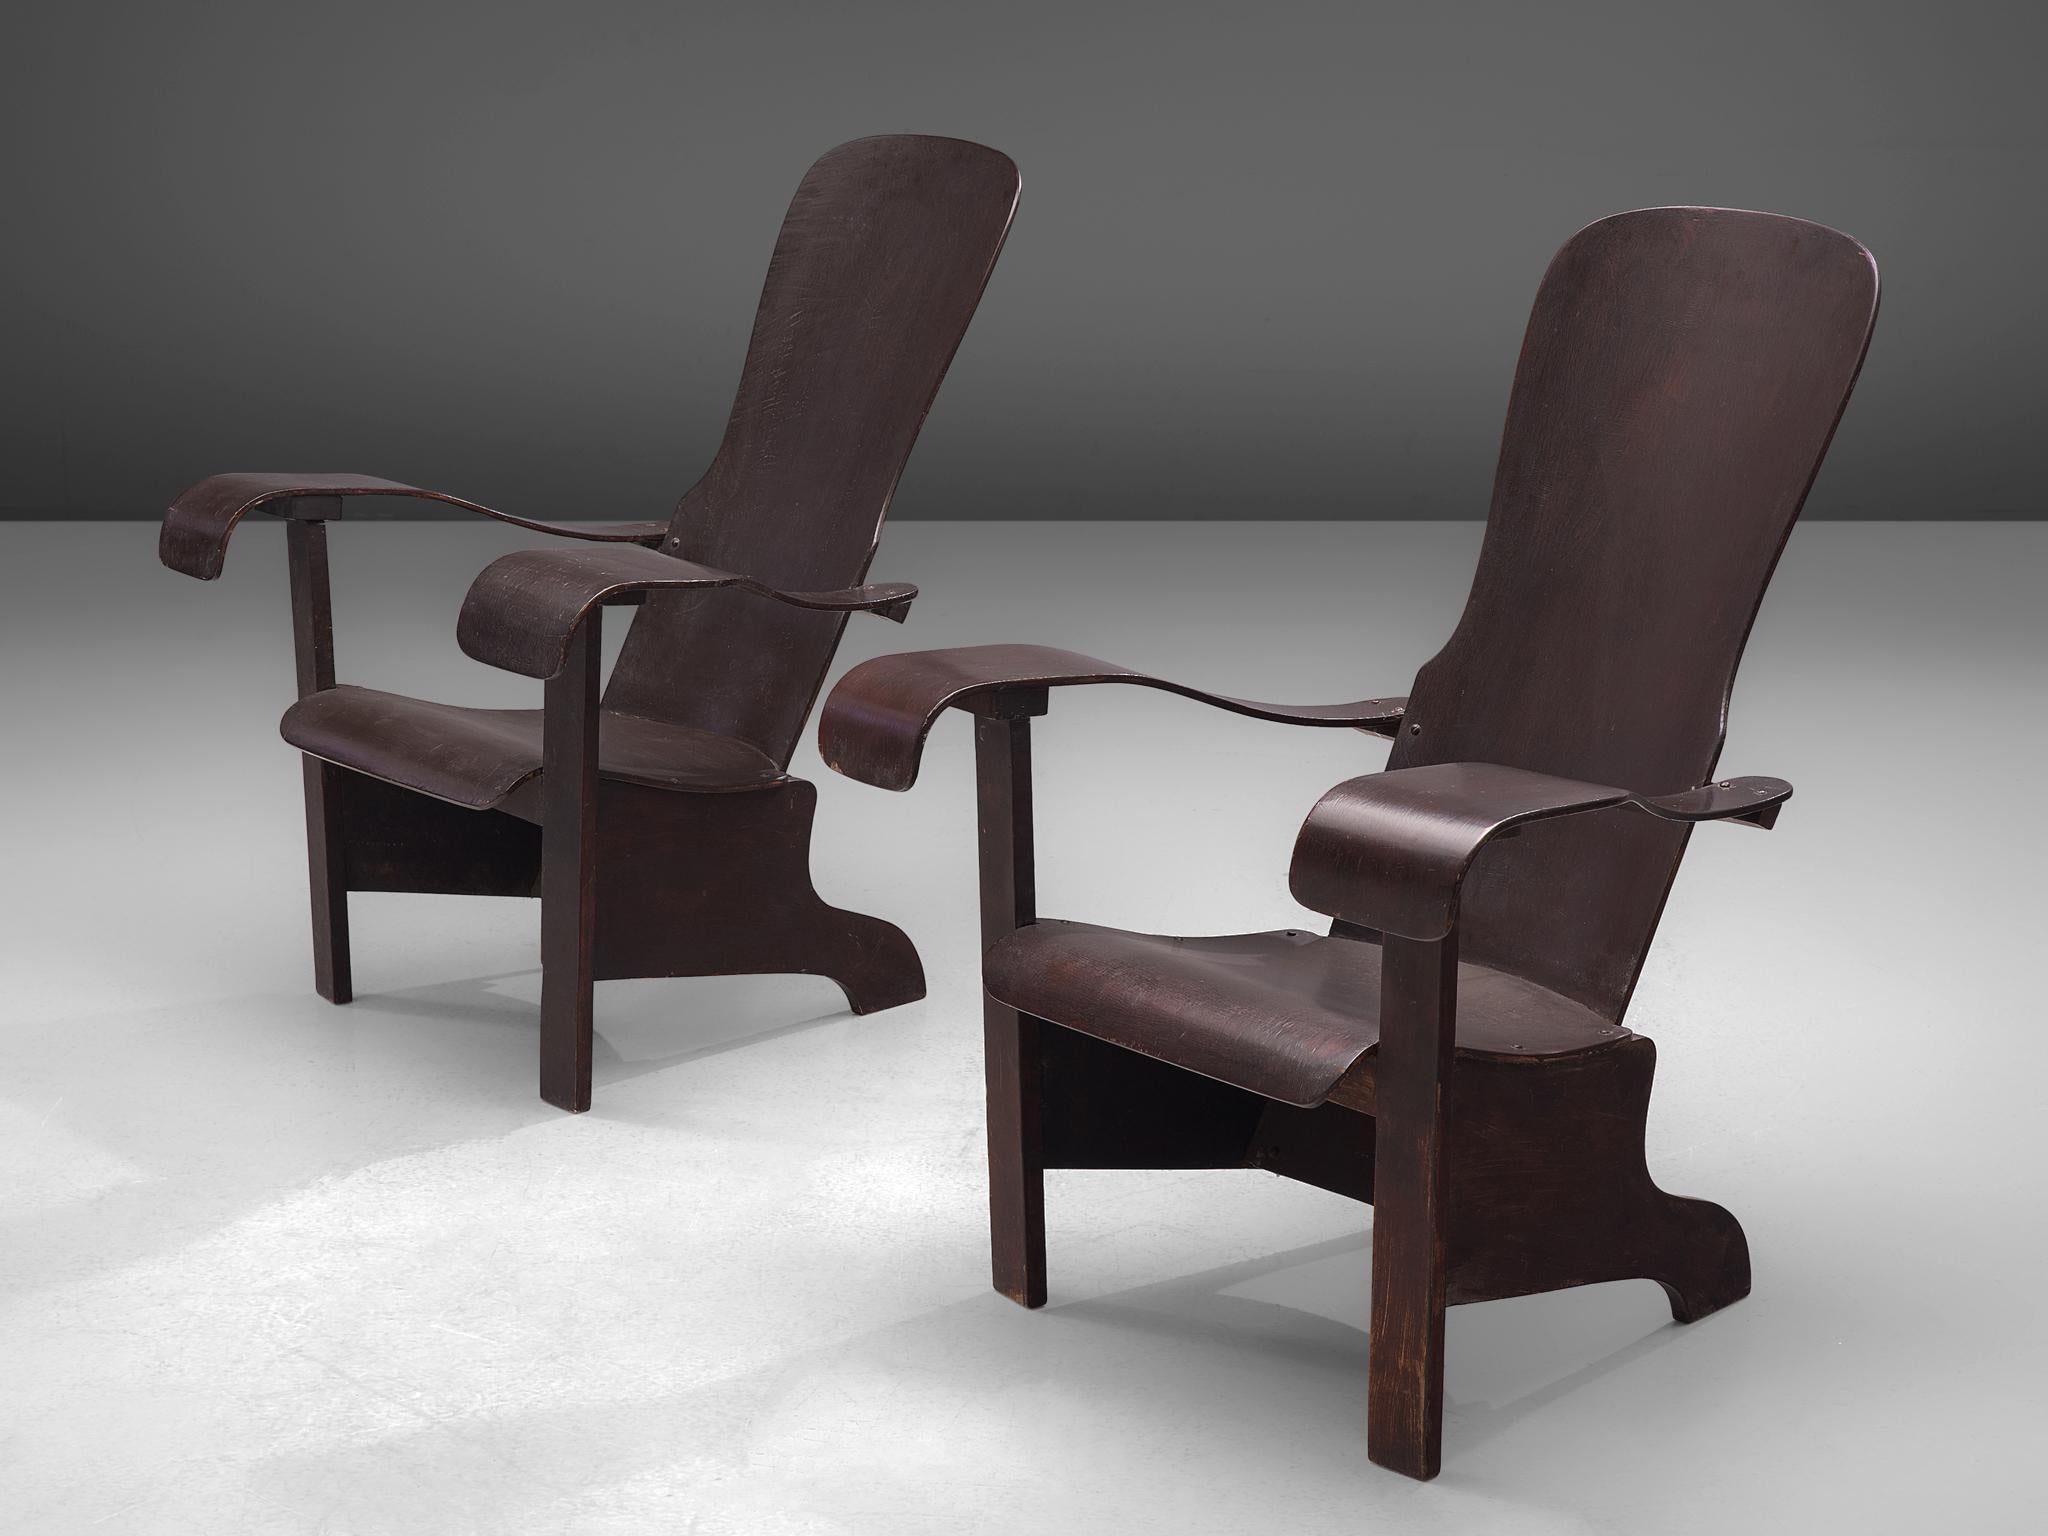 Brazilian Pair of Lounge Chairs in Dark Laminated Wood by Móveis Cimo 1